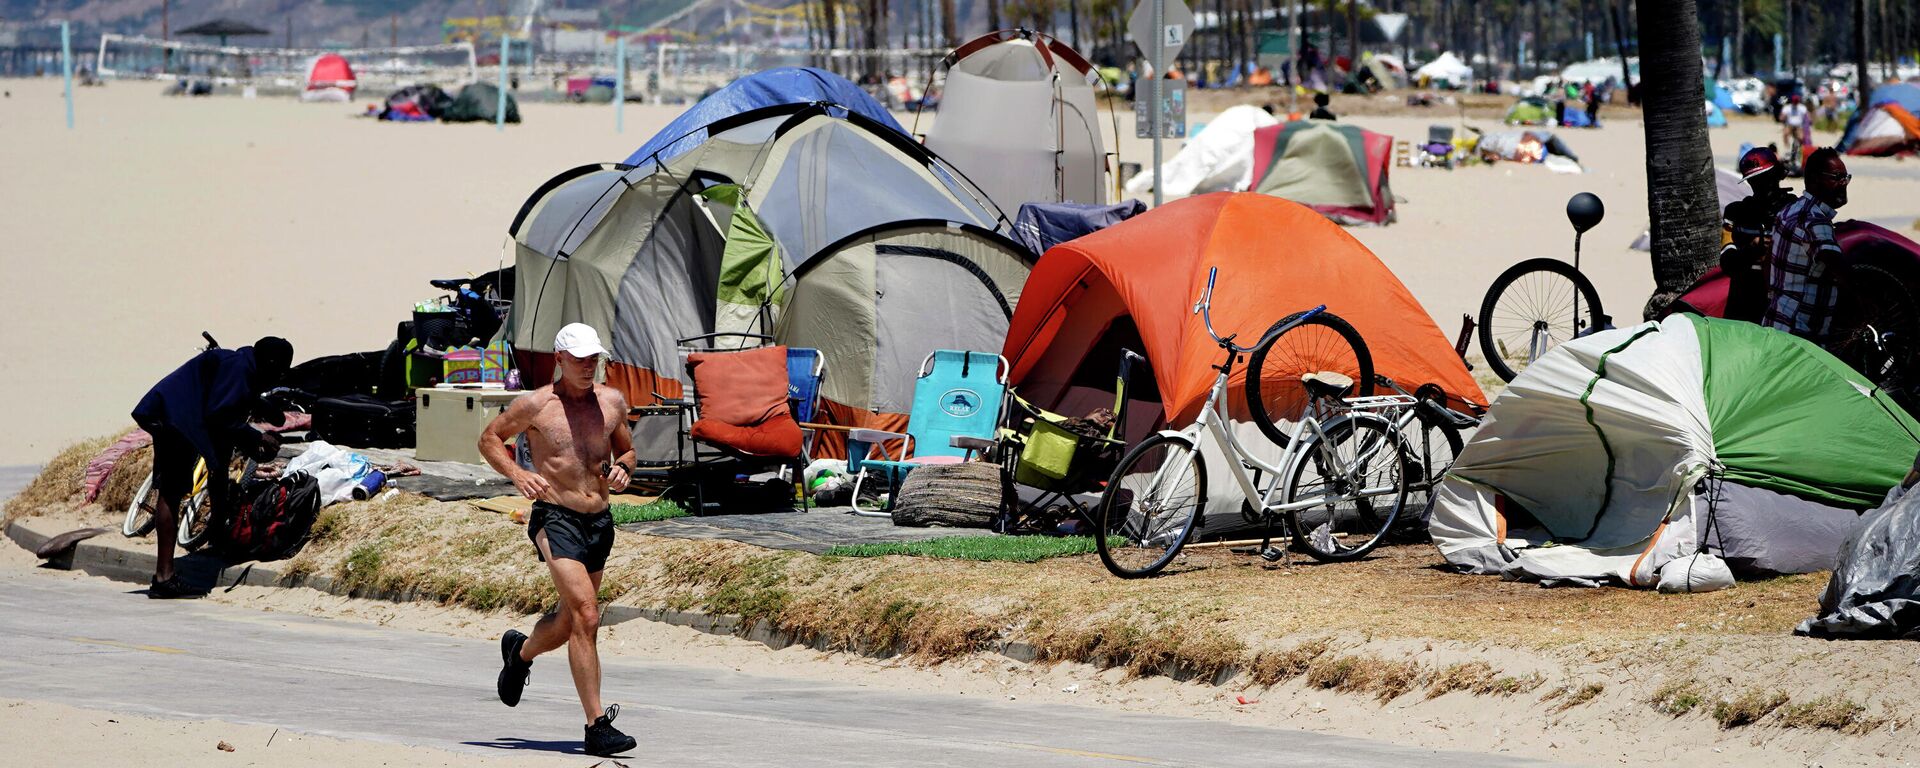  In this June 8, 2021, file photo, a jogger runs past a homeless encampment in the Venice Beach section of Los Angeles. California Gov. Newsom on Thursday, Sept 16, 2021, approved two measures to slice through local zoning ordinances as the most populous state struggles with soaring home prices, an affordable housing shortage and stubborn homelessness. Newson signed the most prominent legislation despite nearly 250 cities objecting that it will, by design, undermine local planning and control. - Sputnik International, 1920, 28.01.2024